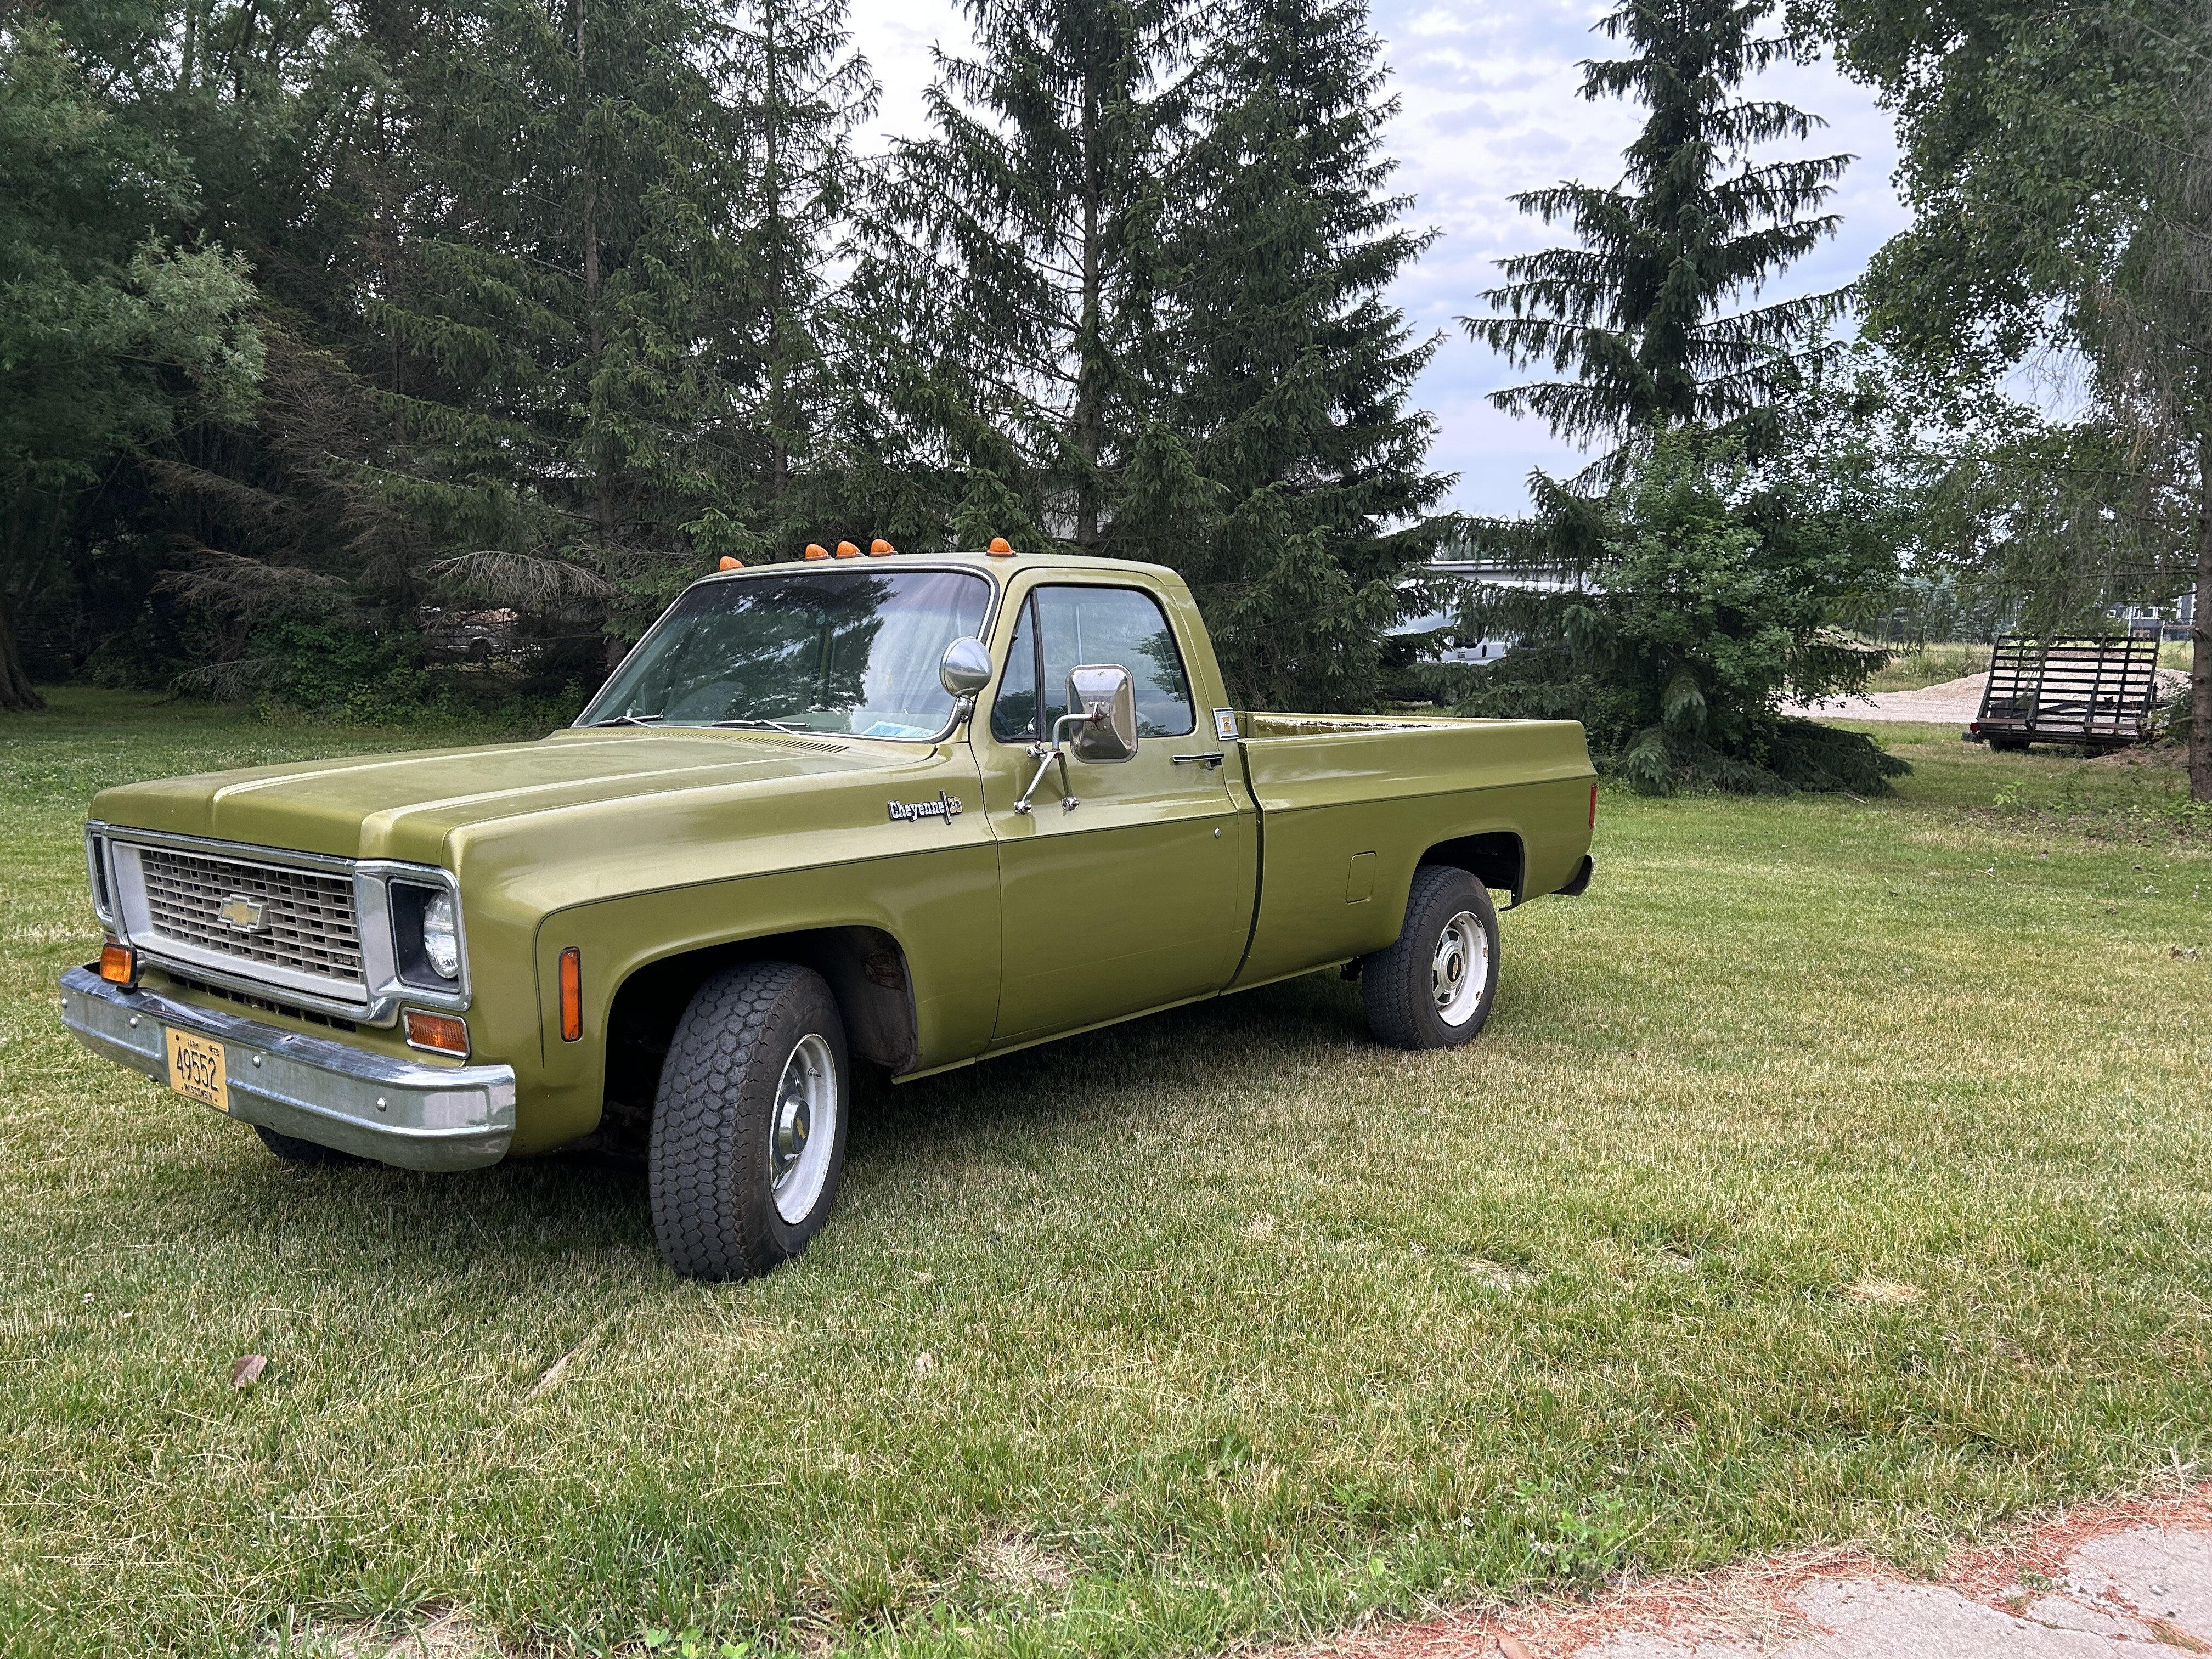 1973 Chevrolet C/K Truck Classic Cars for Sale - Classics on